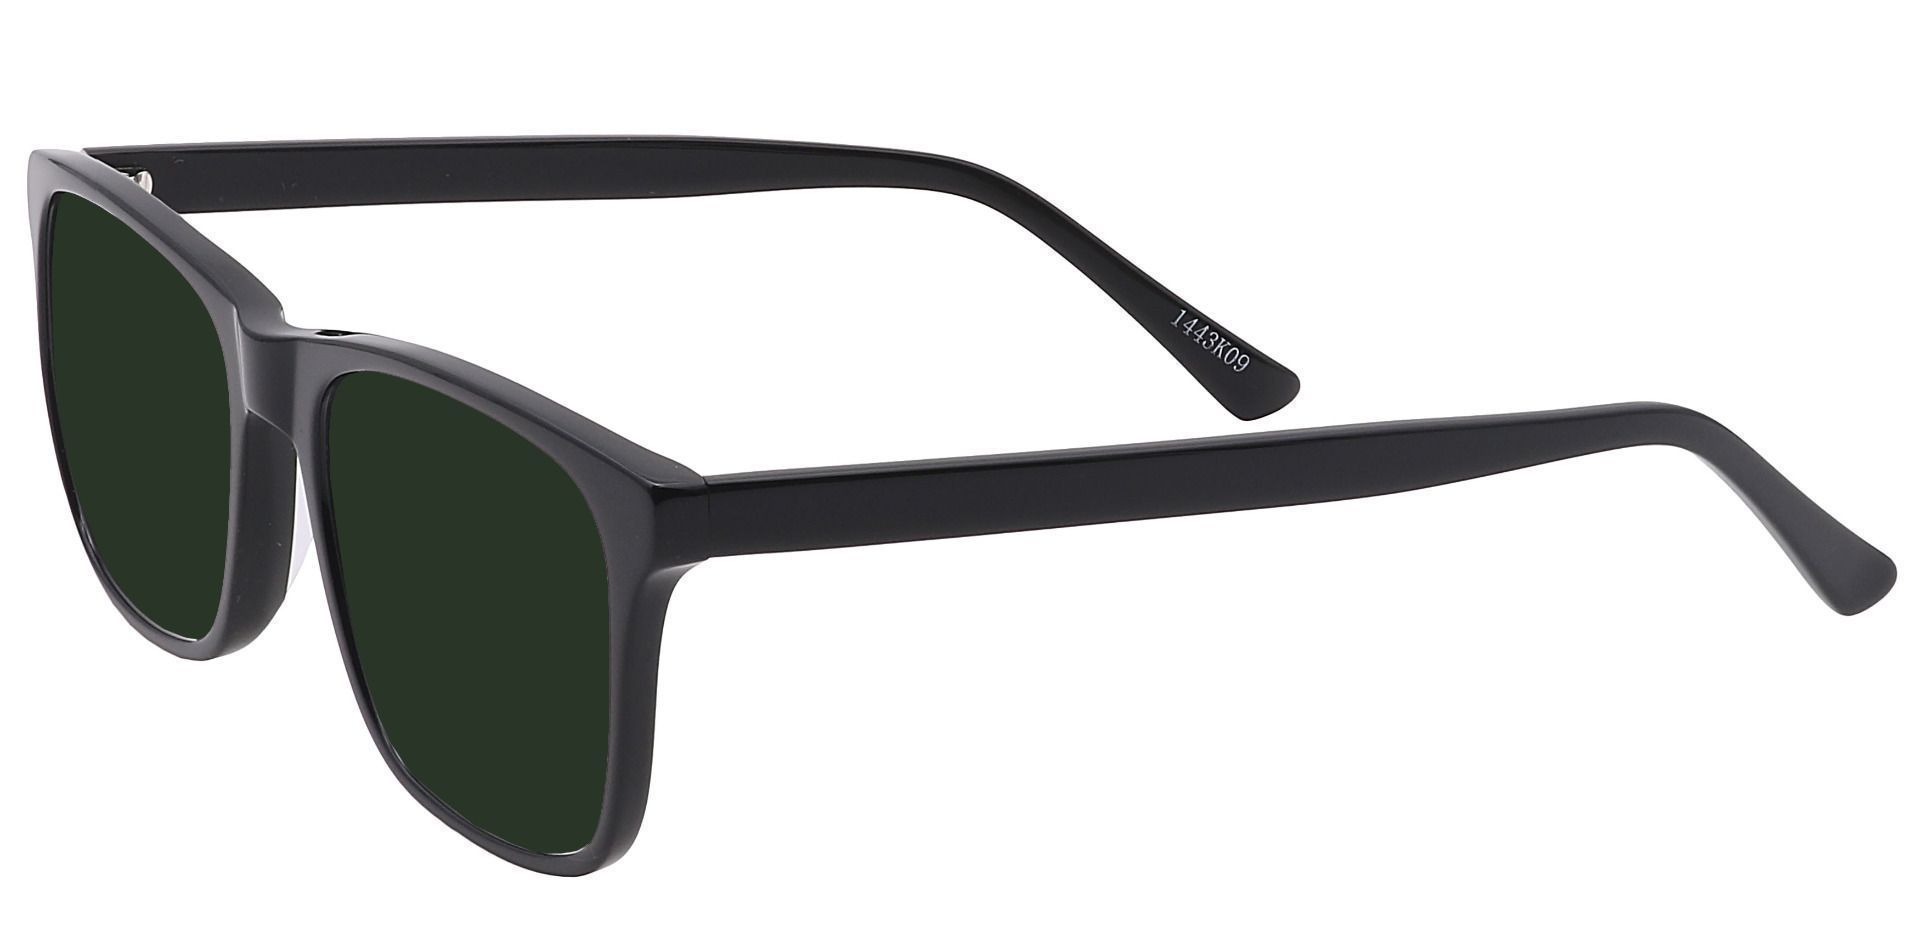 Cantina Square Lined Bifocal Sunglasses - Black Frame With Green Lenses